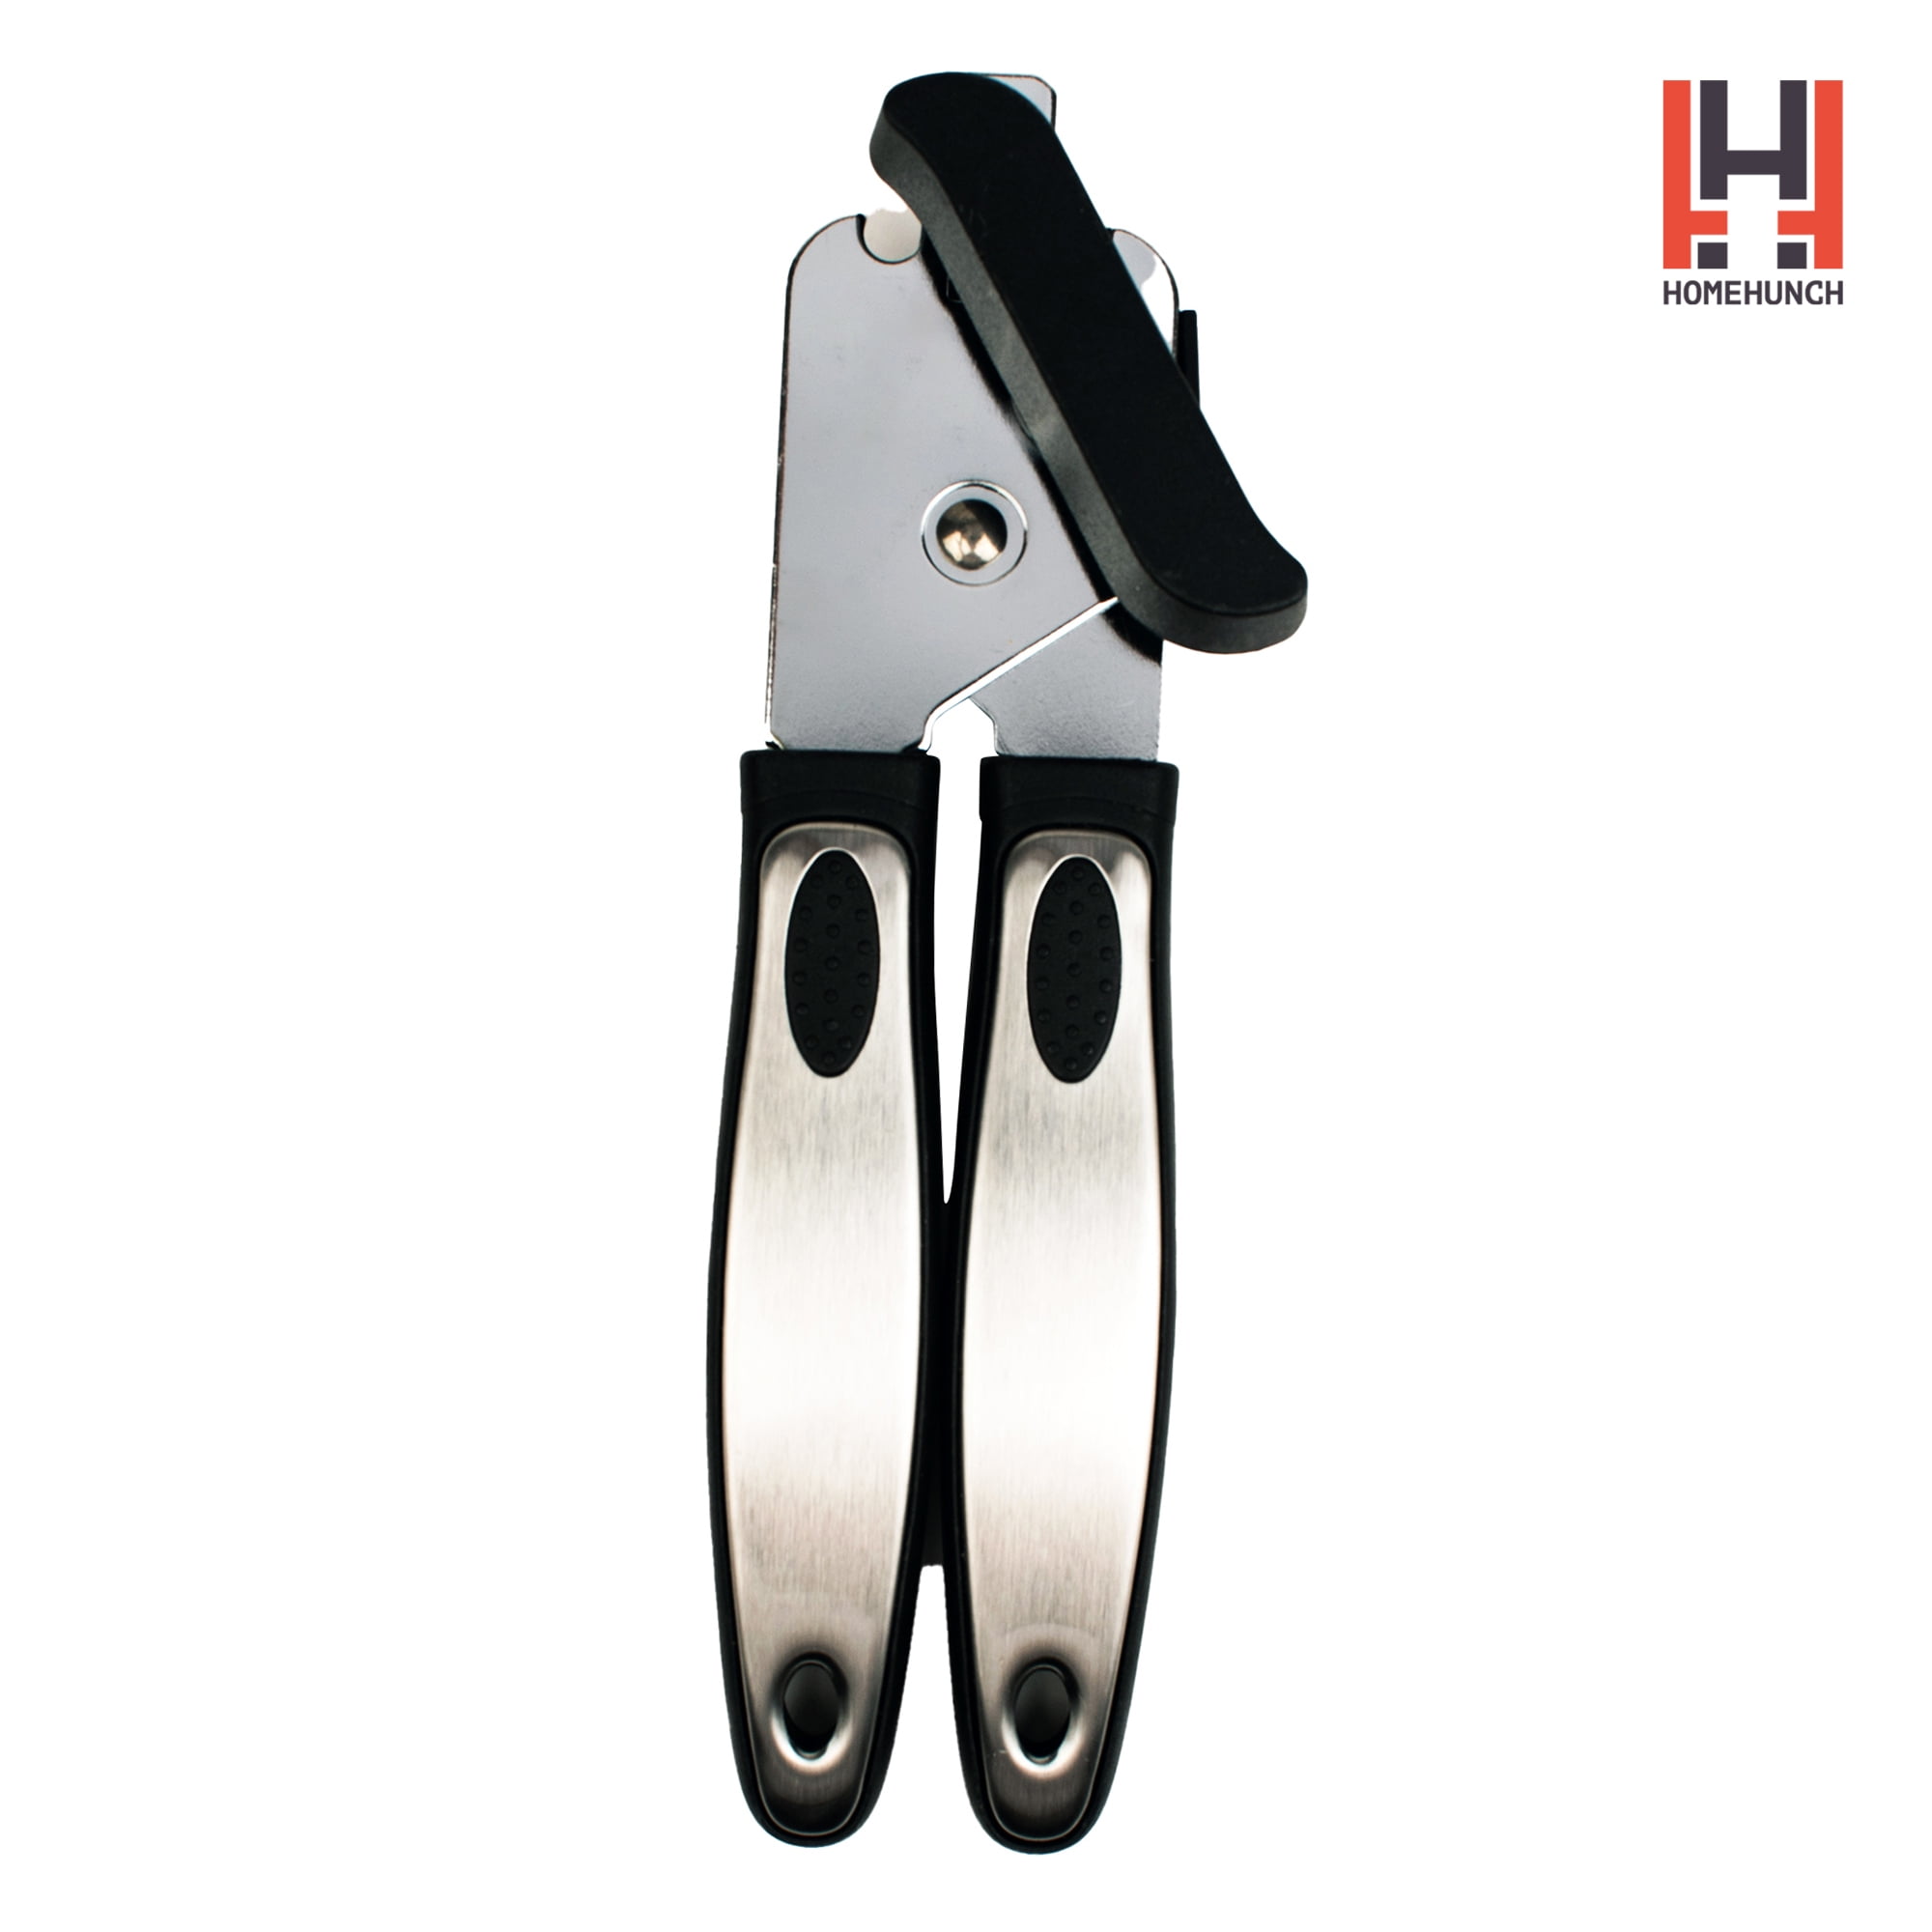 Heavy Duty Can Opener - Manual Can Openers With Premium Quality Razor Sharp  Blades - Dishwasher Safe Hand Can Opener Manual - Can Opener Heavy Duty